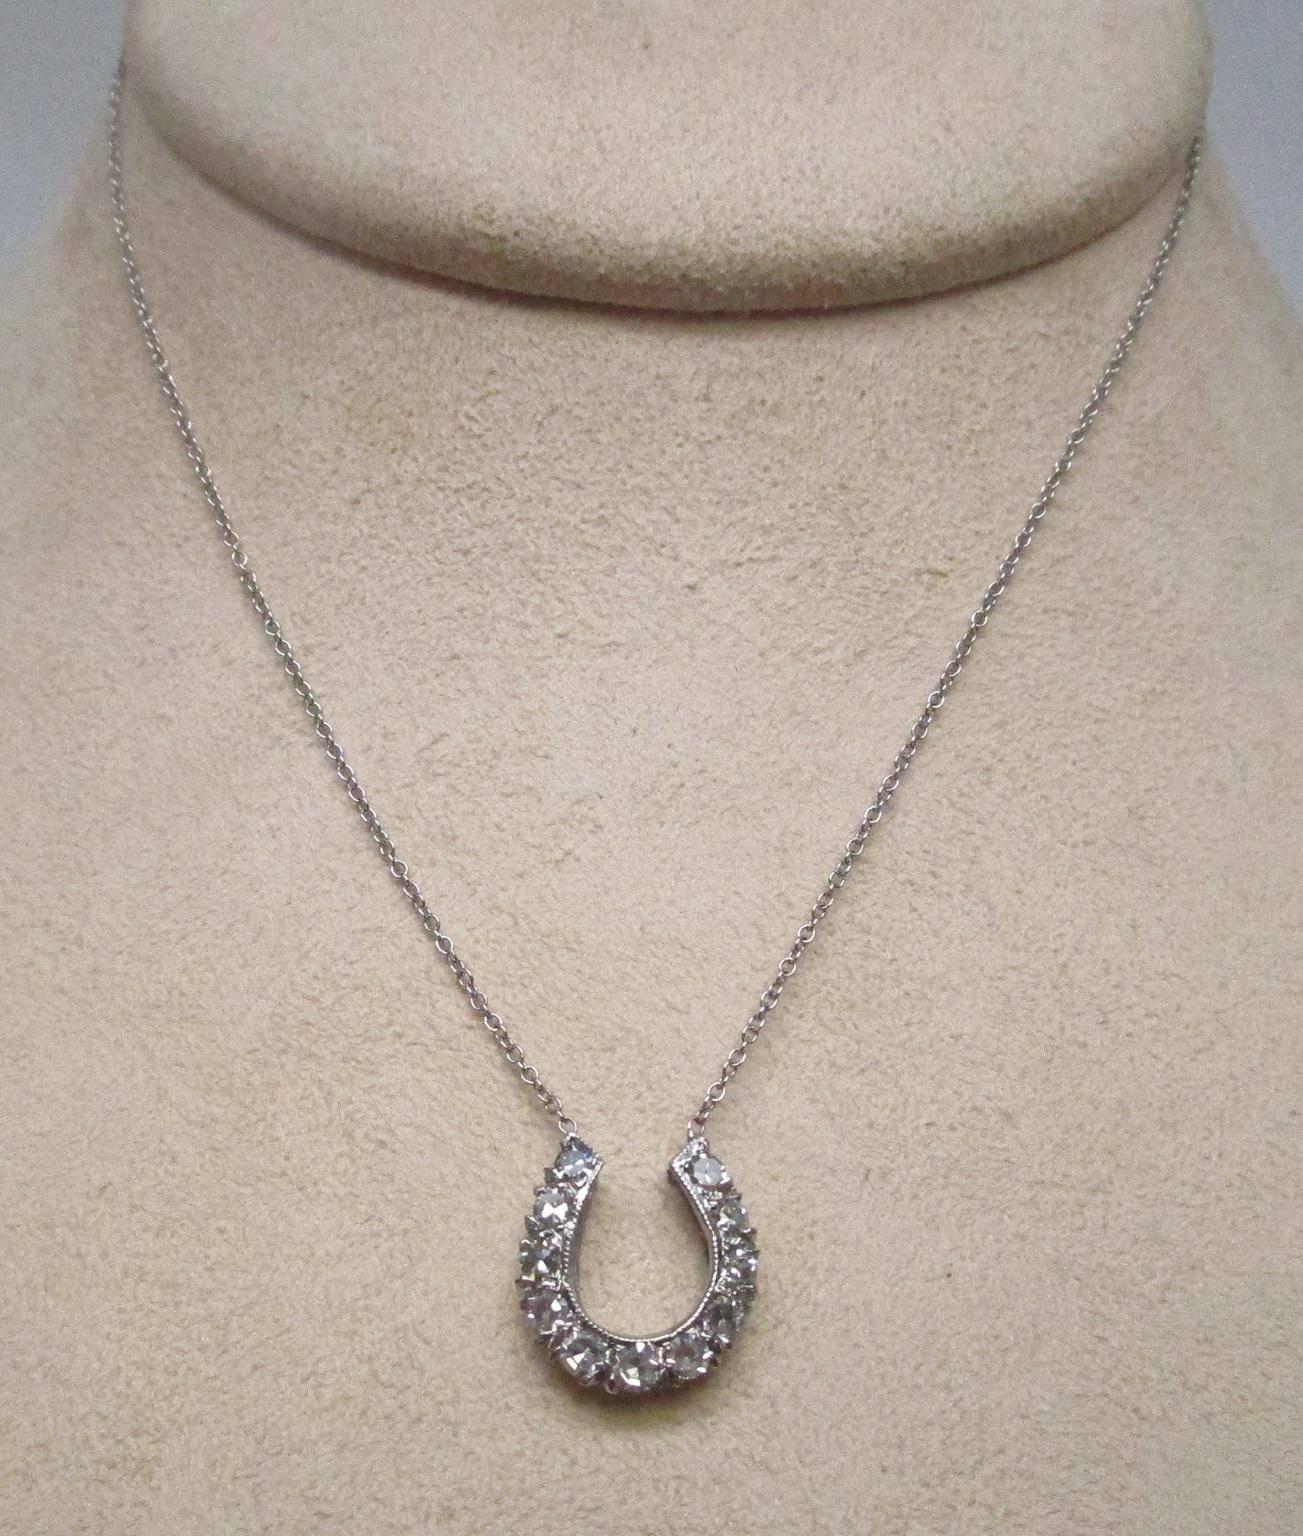 This is your lucky day! You could own this shimmering horseshoe made of 14K white gold and a half carat of diamonds. One can never have too much luck and this will hold a lot. It is made so the luck won't just run out, turned up. This would make a